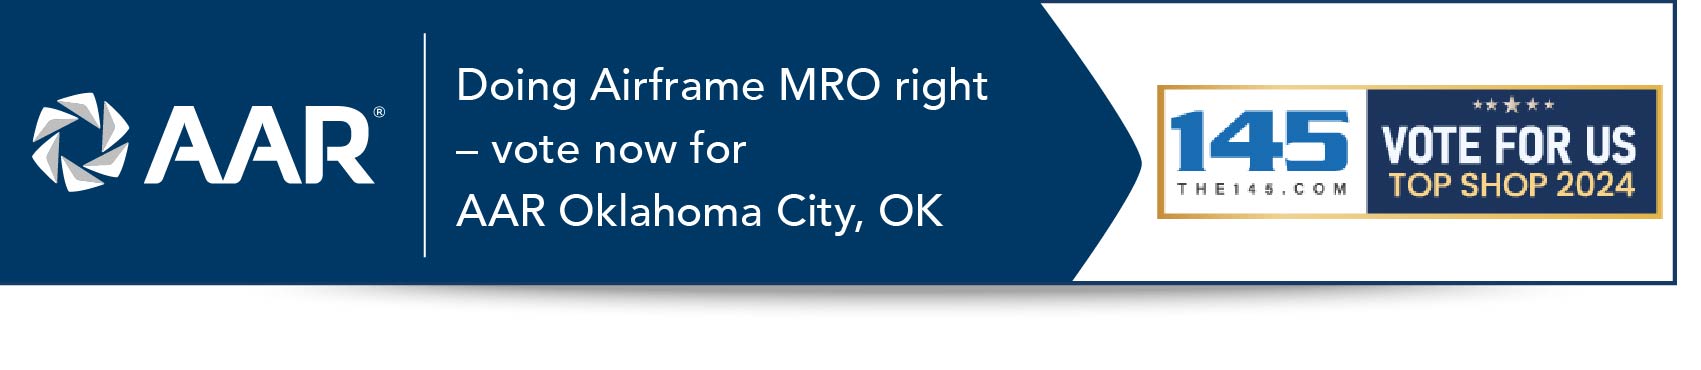 Vote for MRO Services - Oklahoma as Your Top Shop